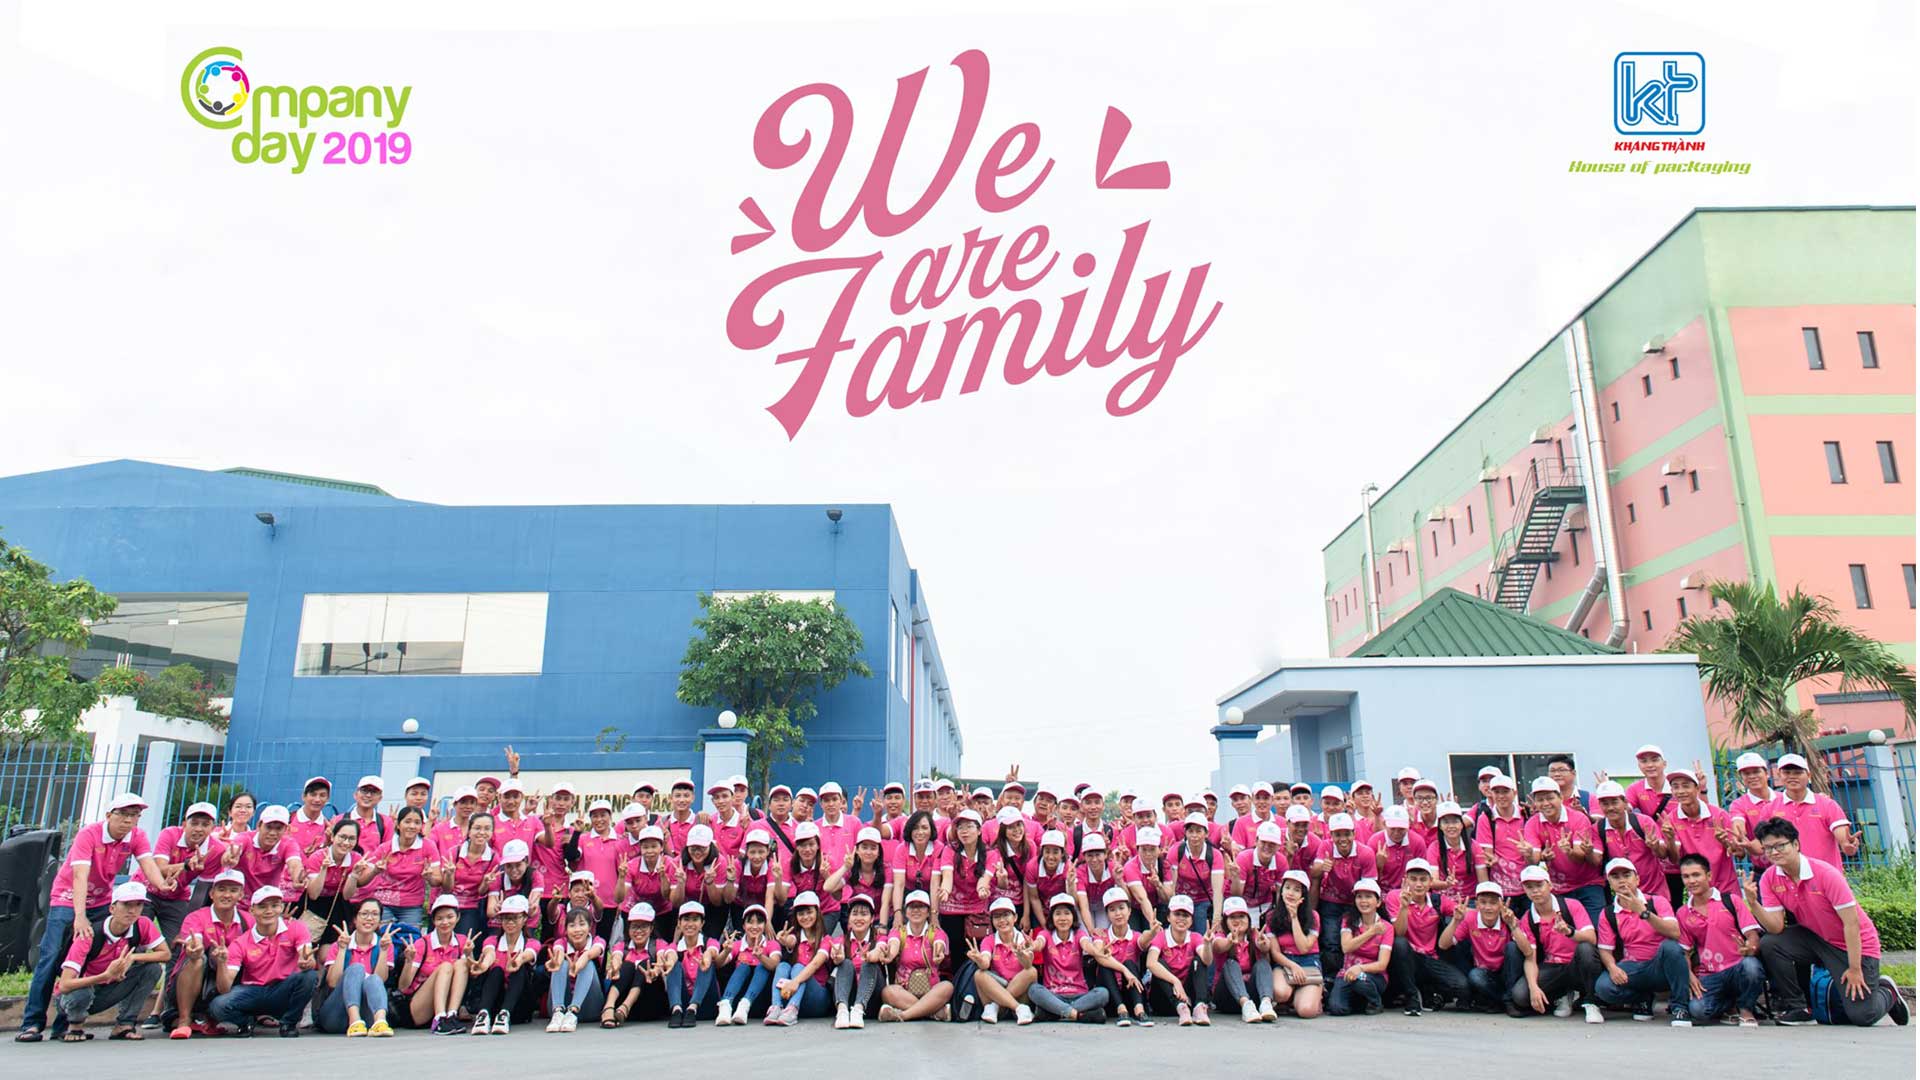 Company Day 2019: We Are Family